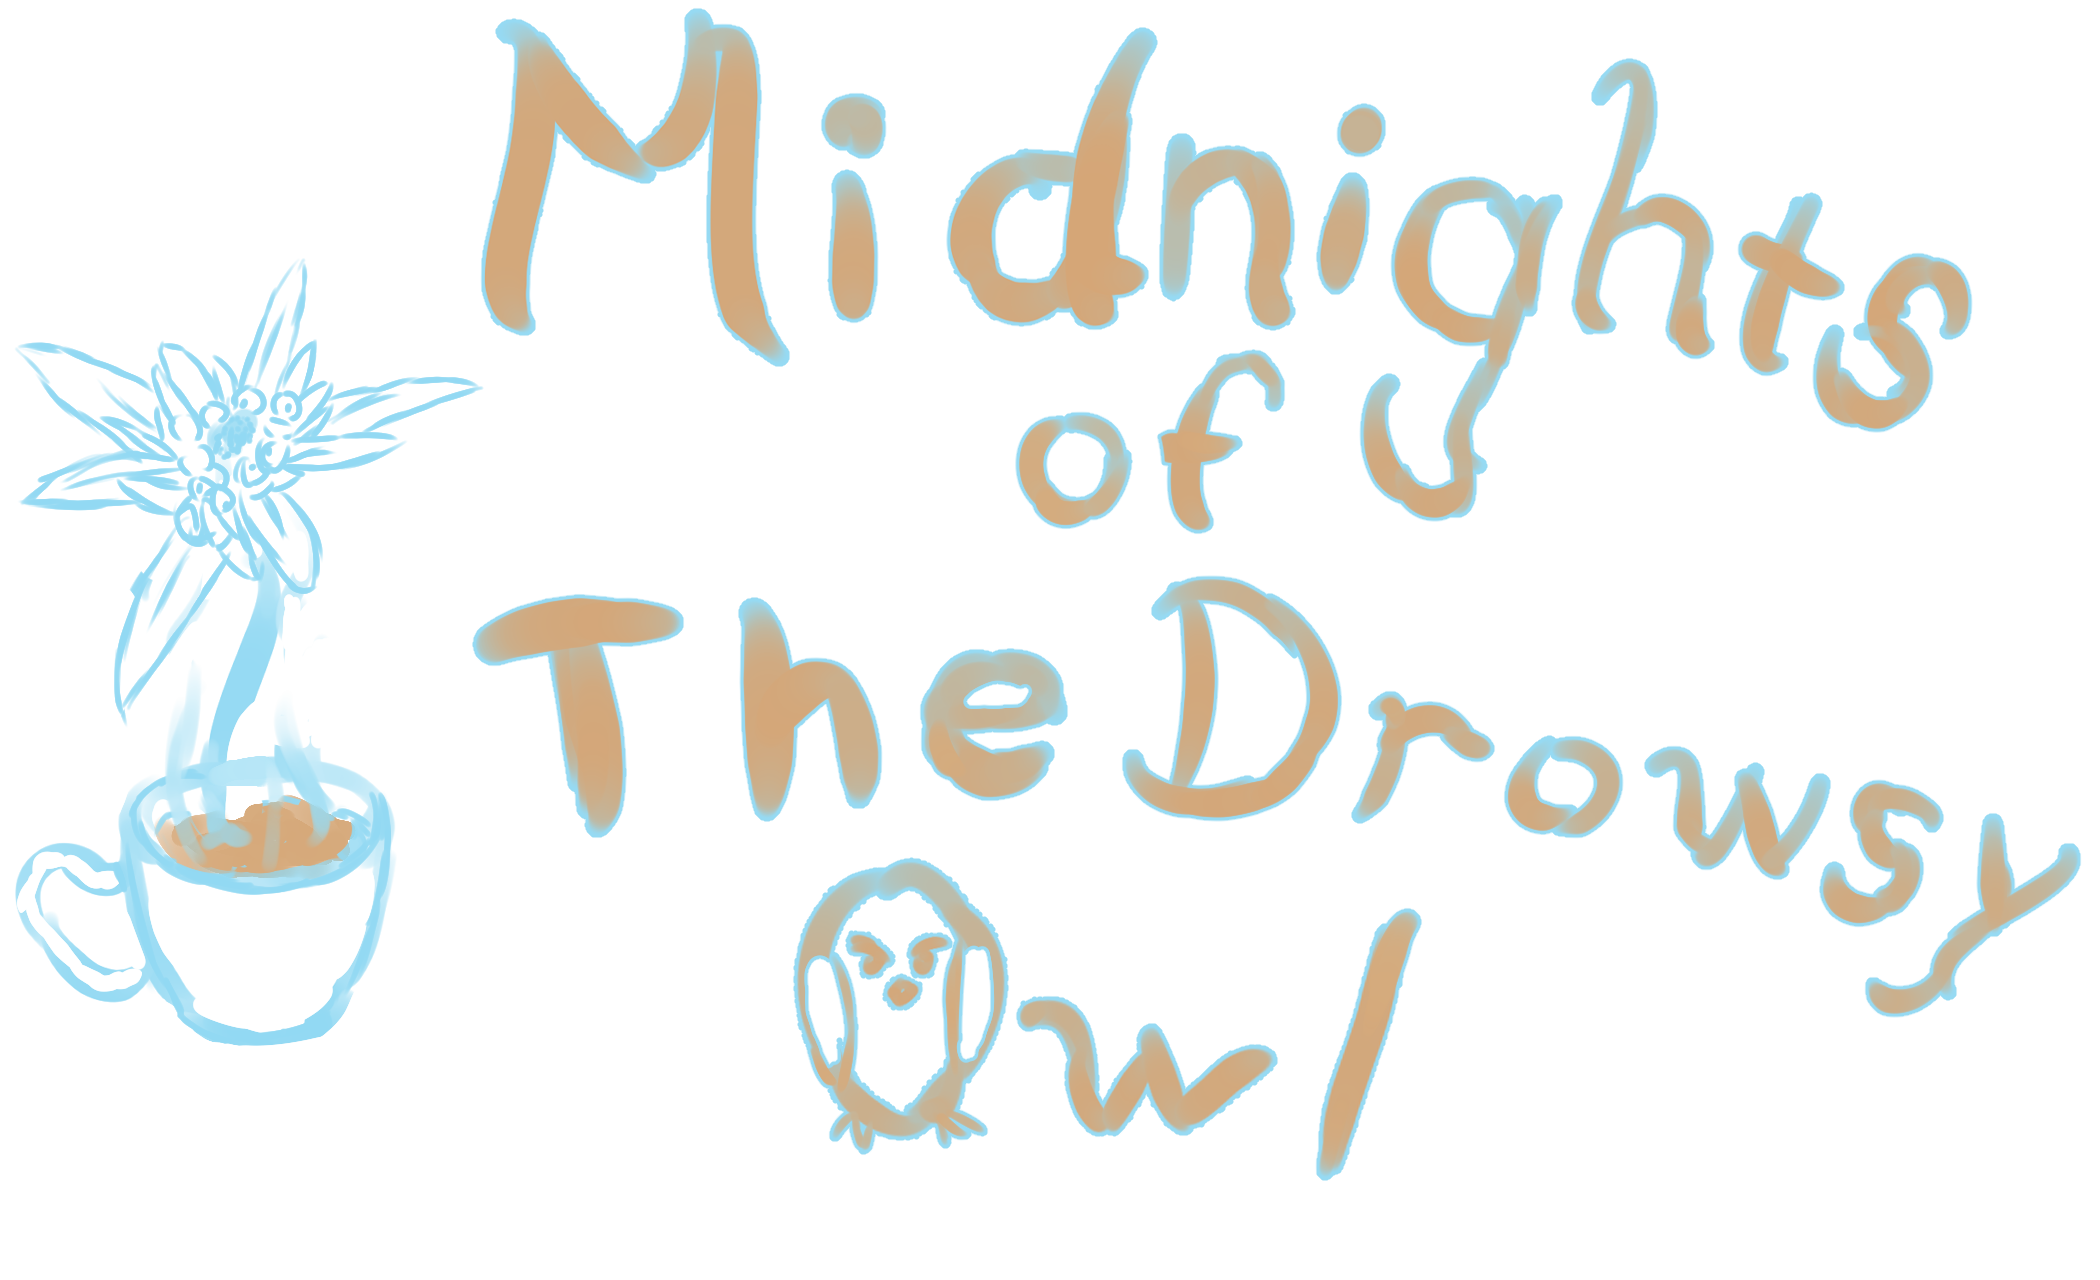 Midnights of The Drowsy Owl